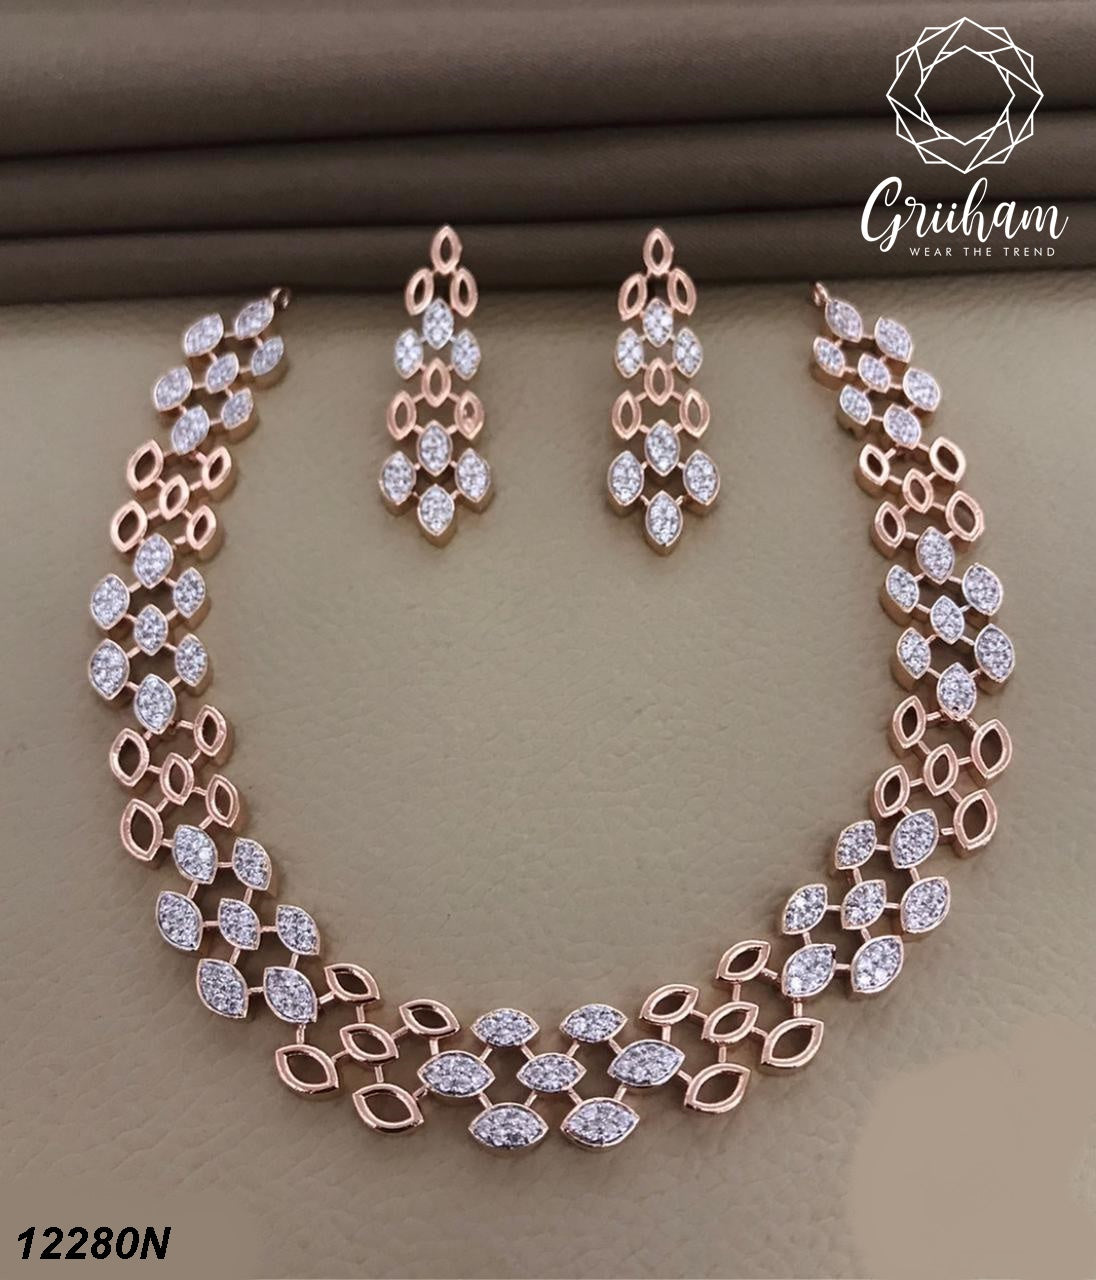 Elegant premium quality cz necklace set rose gold and white gold 12280N